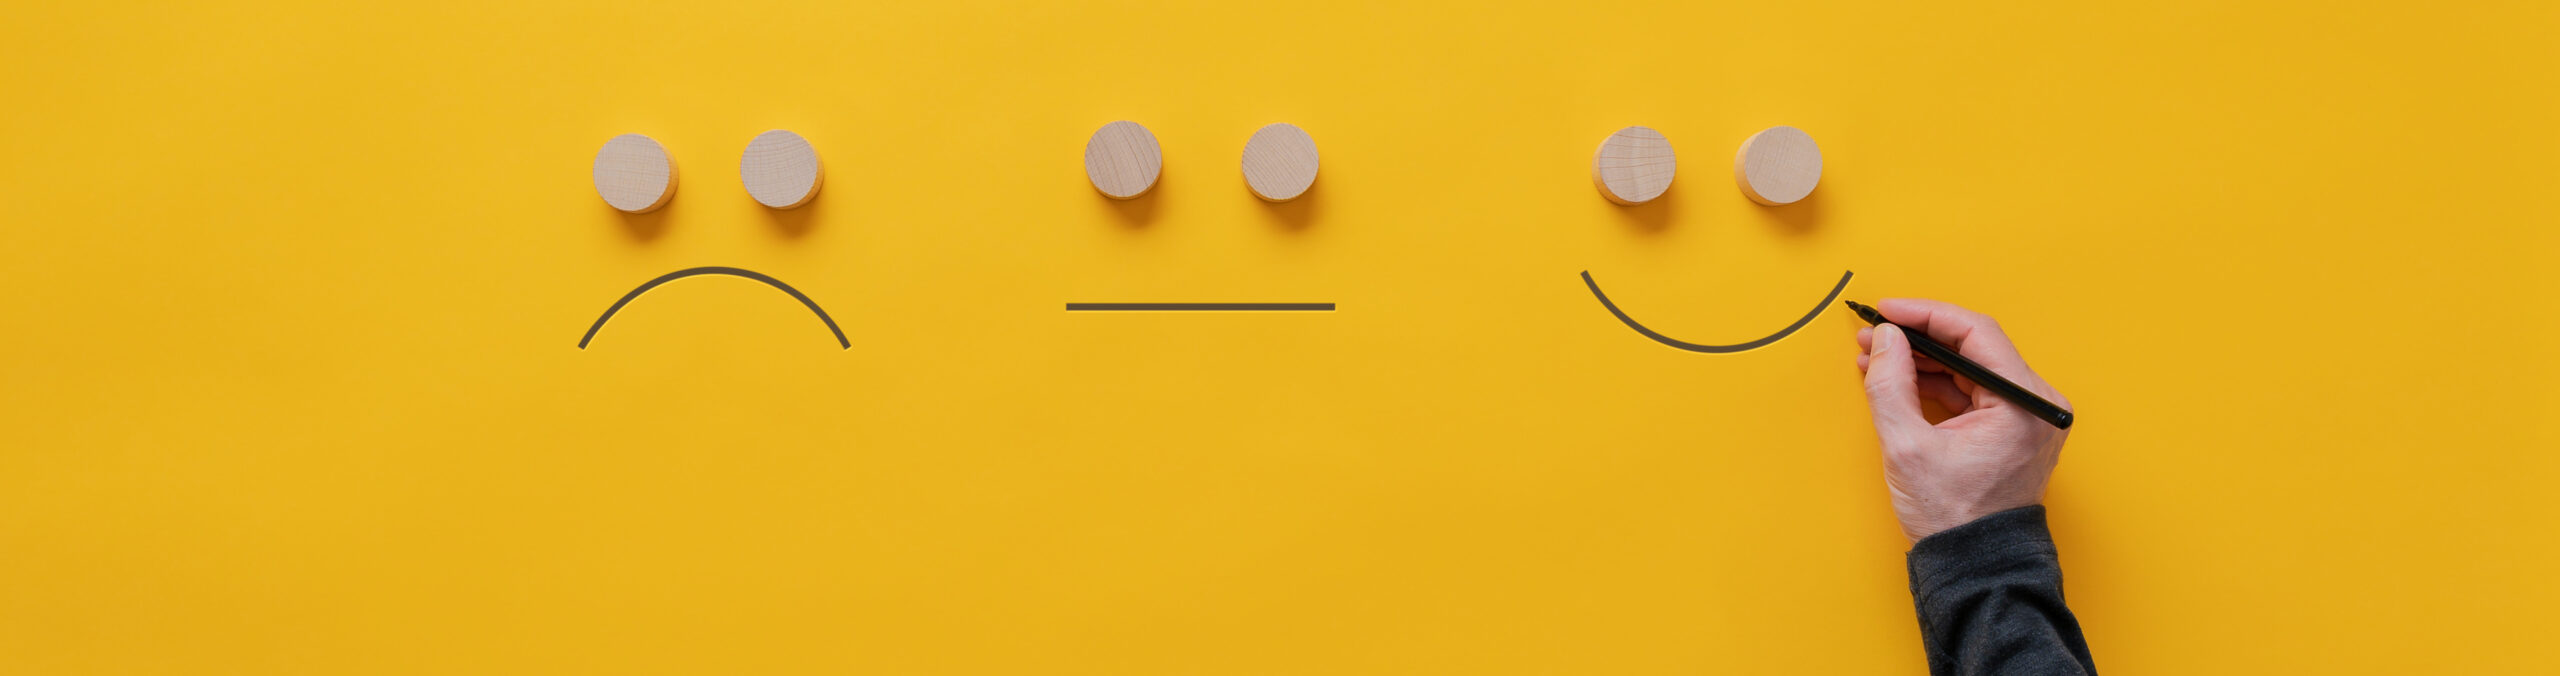 Customer feedback and satisfaction conceptual image - male hand drawing happy, sad and neutral faces over yellow background.